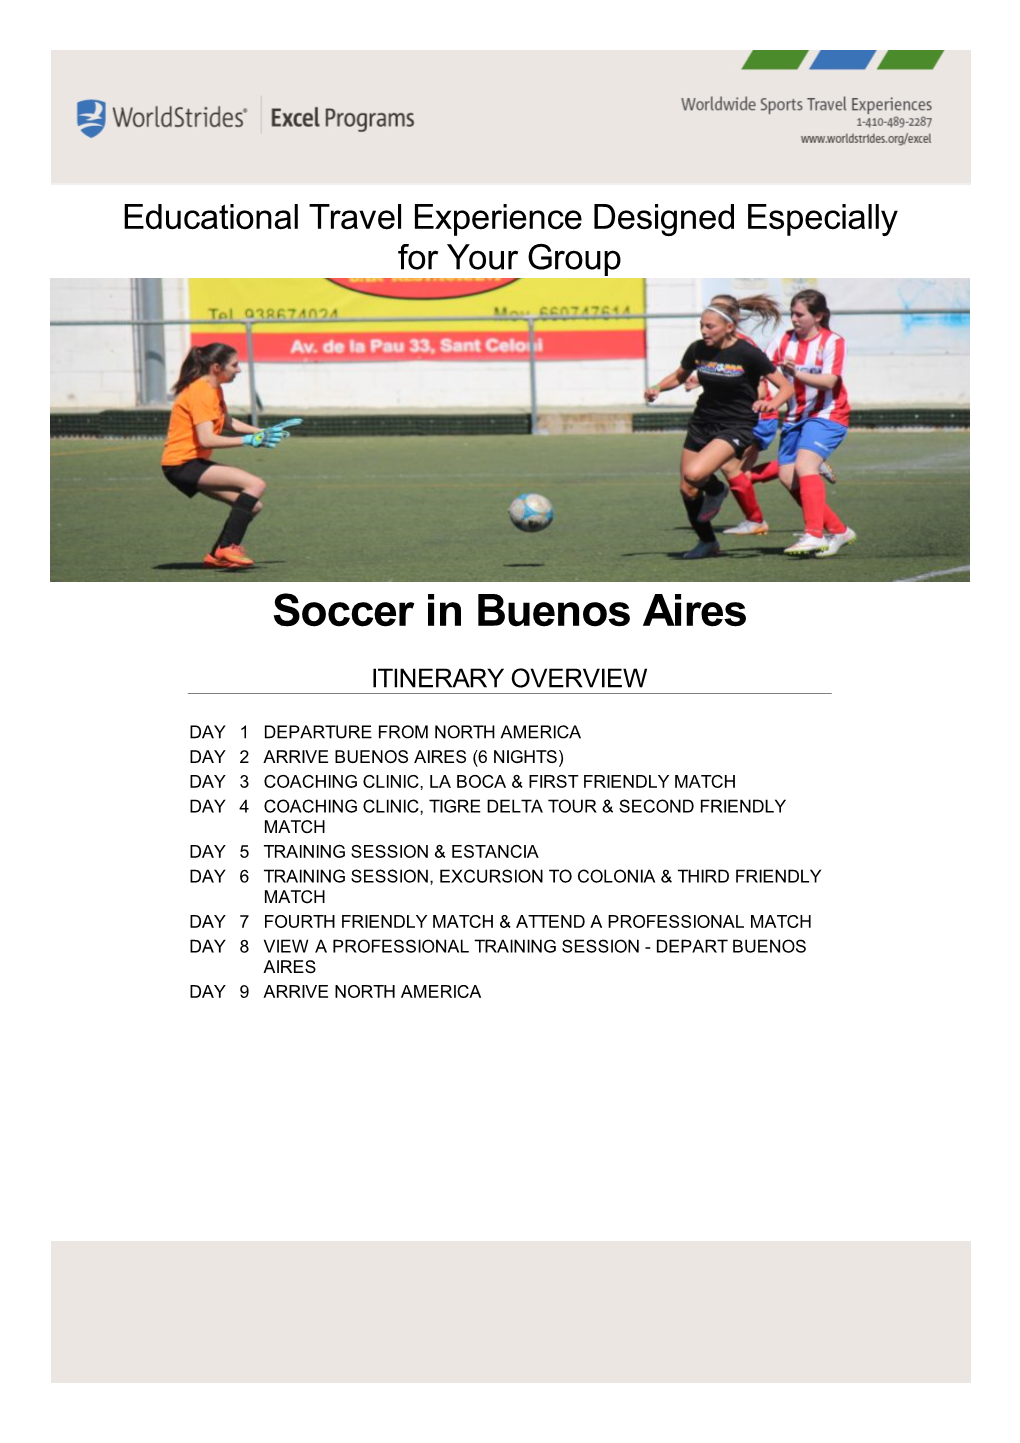 Soccer in Buenos Aires ITINERARY OVERVIEW